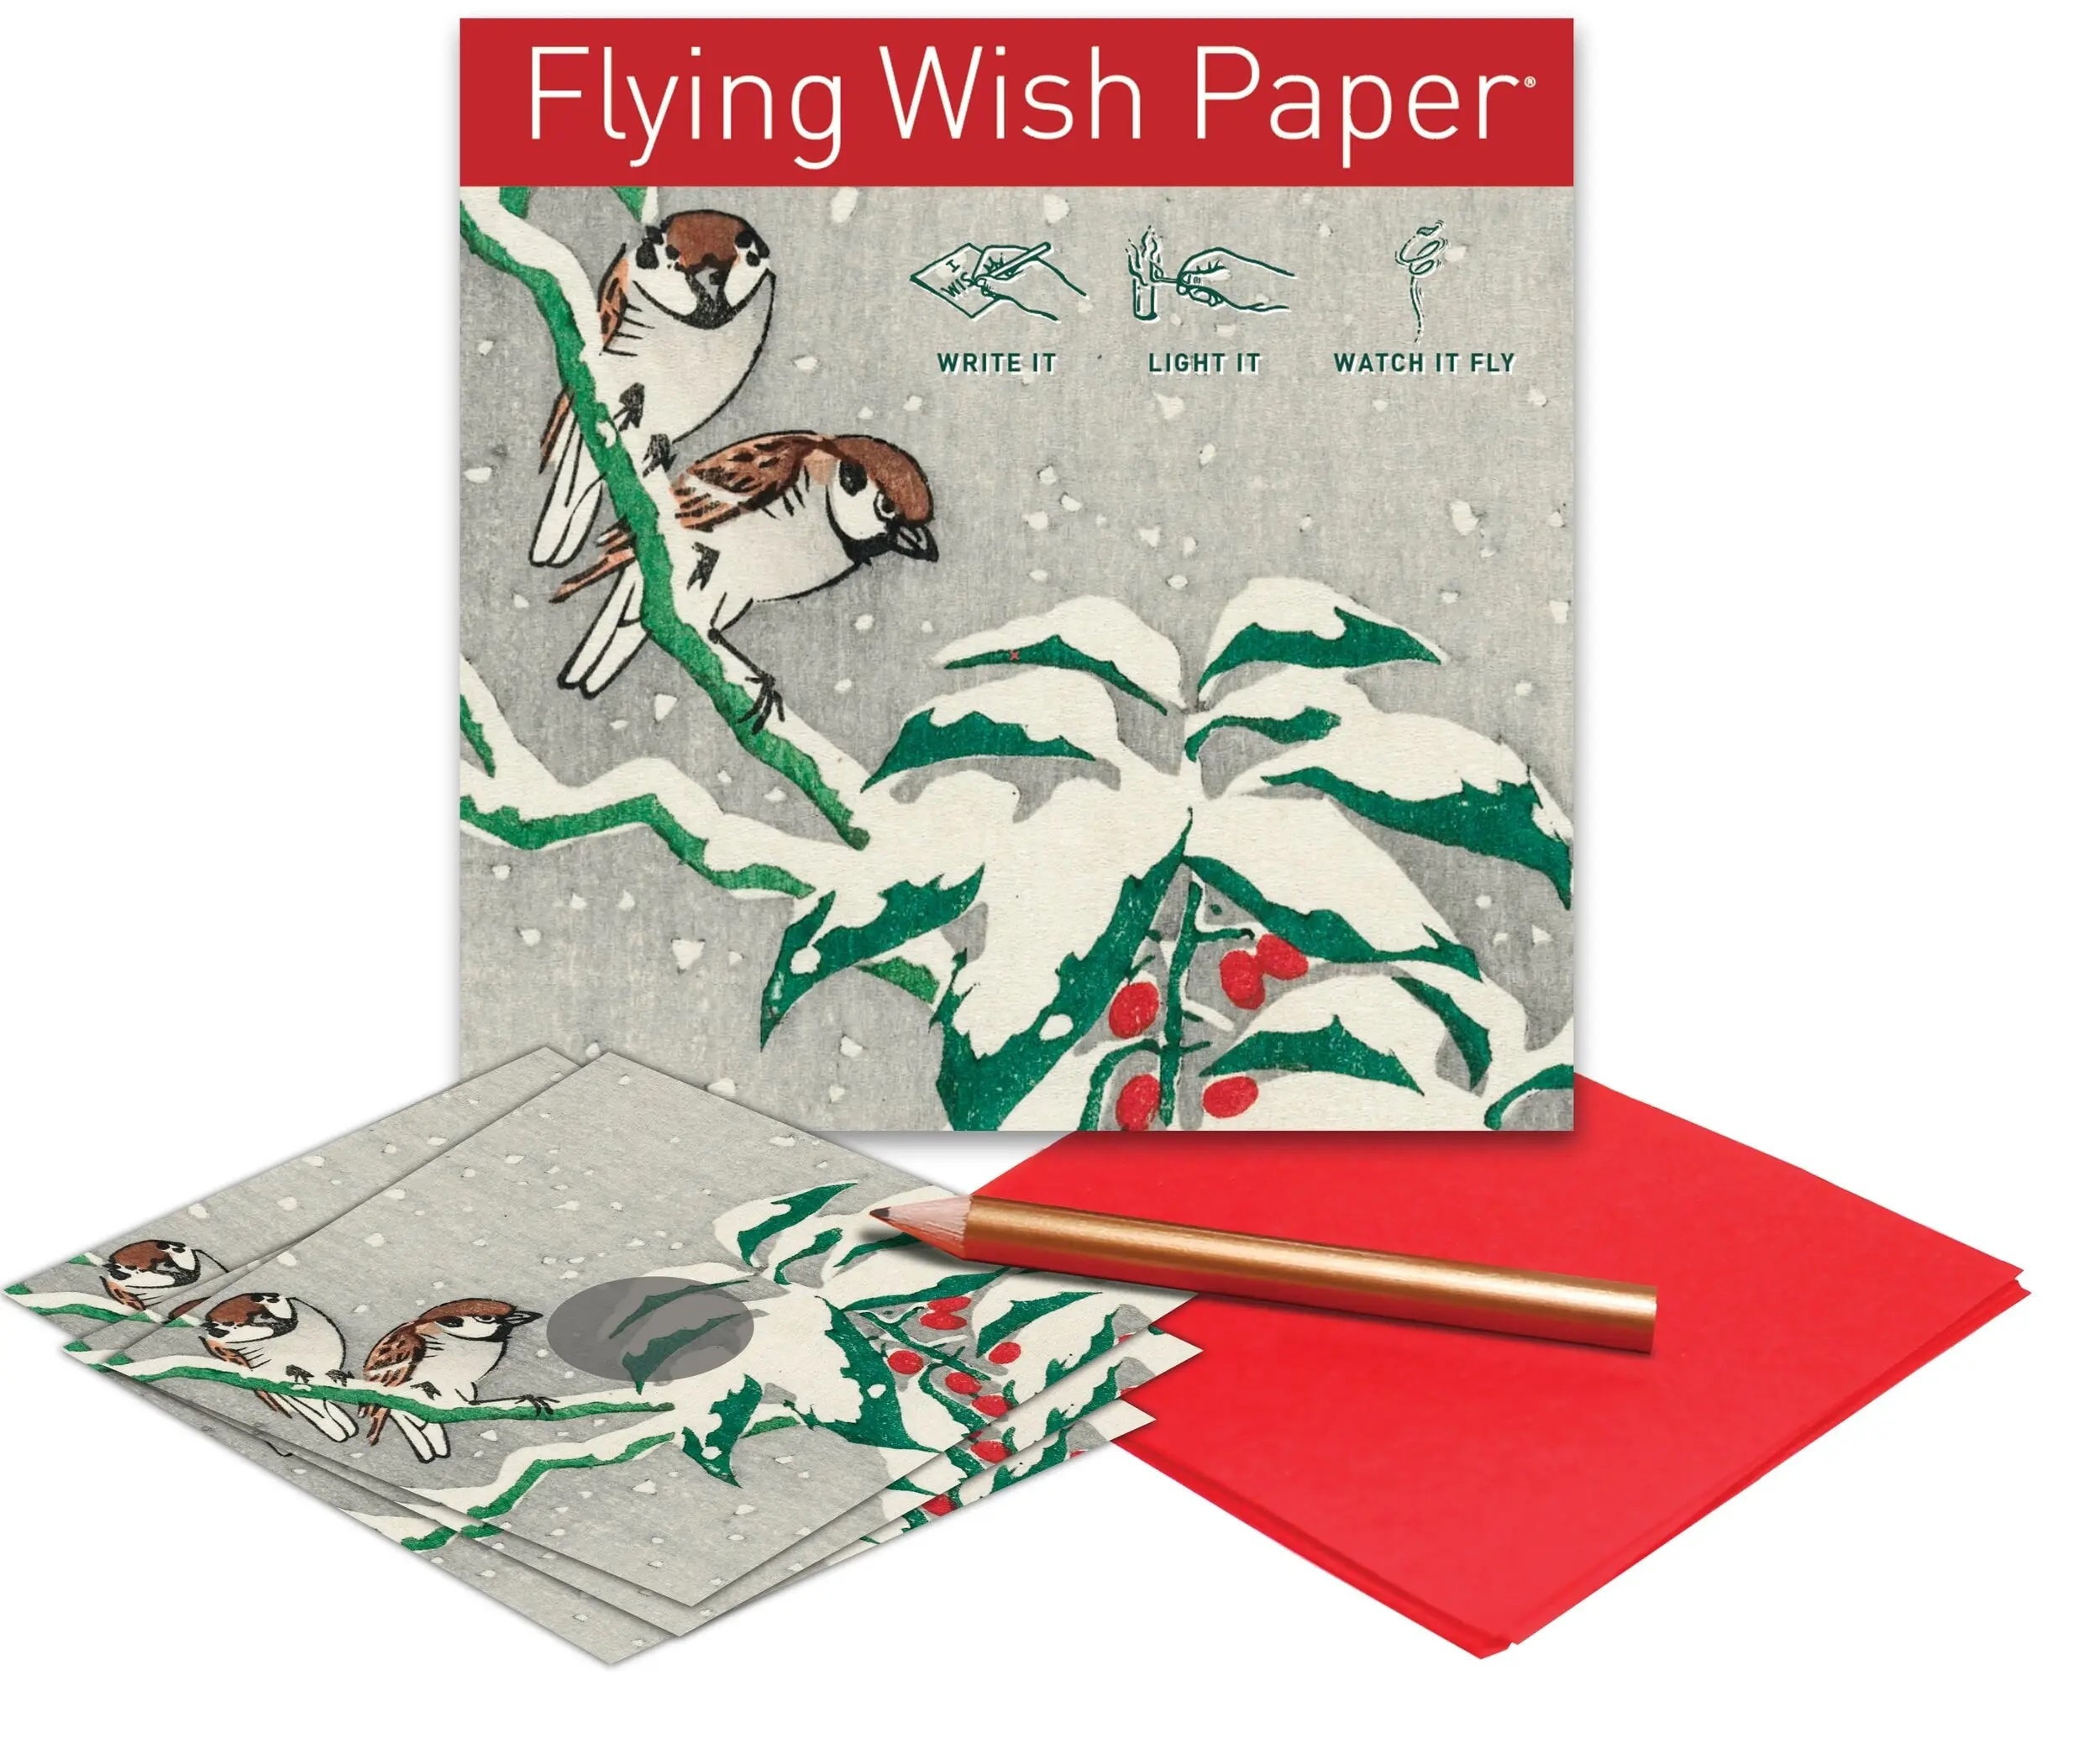 Snowbirds Flying Wish Paper, Law of Attraction, Manifesting Kit, Prayer  Paper, Magic Flash Paper, Whimsical Gift, Wedding or Party Favor 